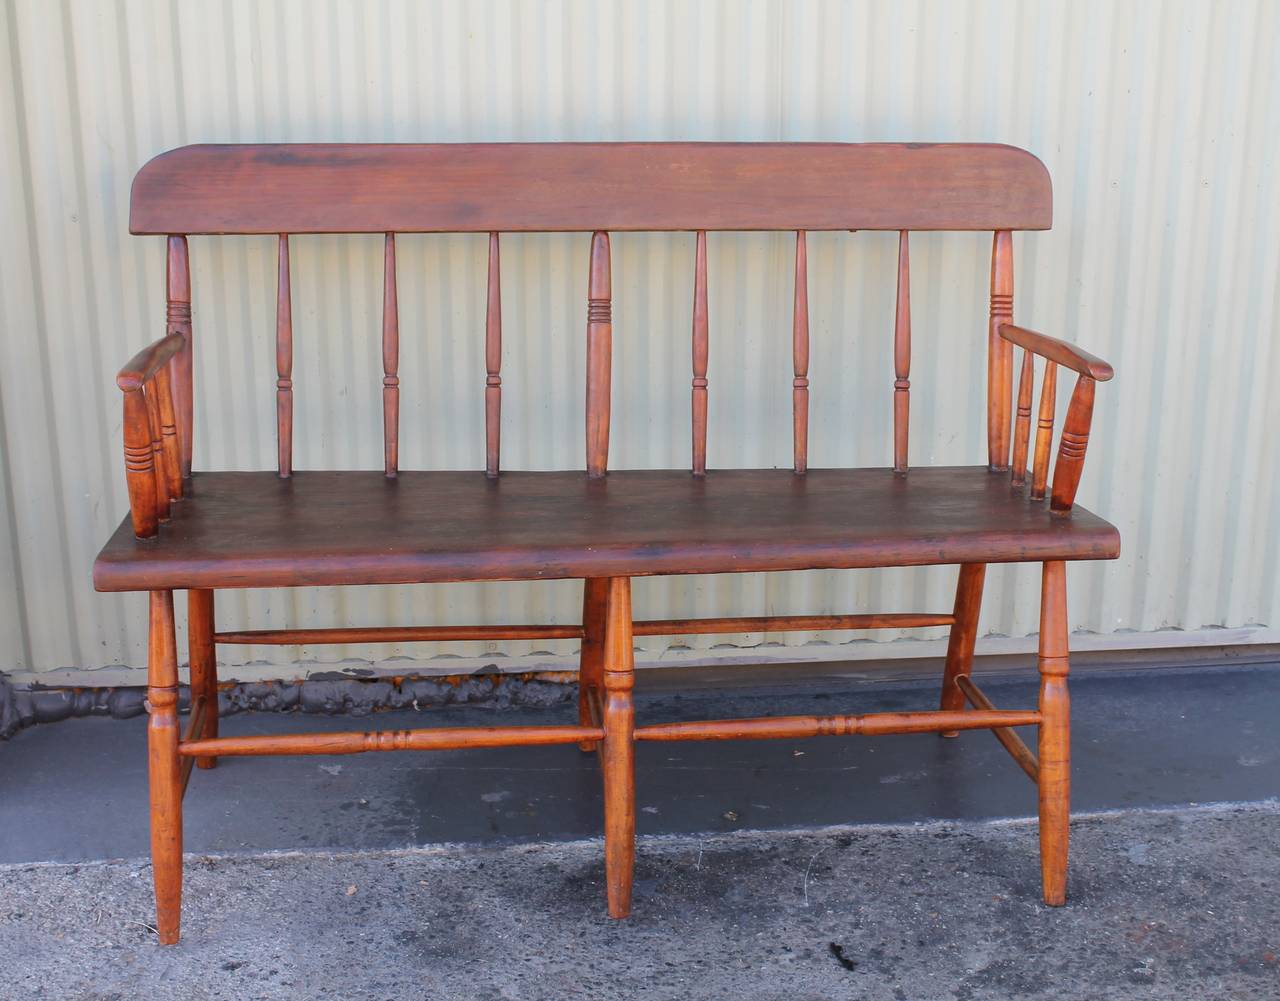 19th century pine settle bench or loveseat from New England. This plank seat has a wonderful worn patina. This sturdy bench is in great untouched condition and has a wonderful look.